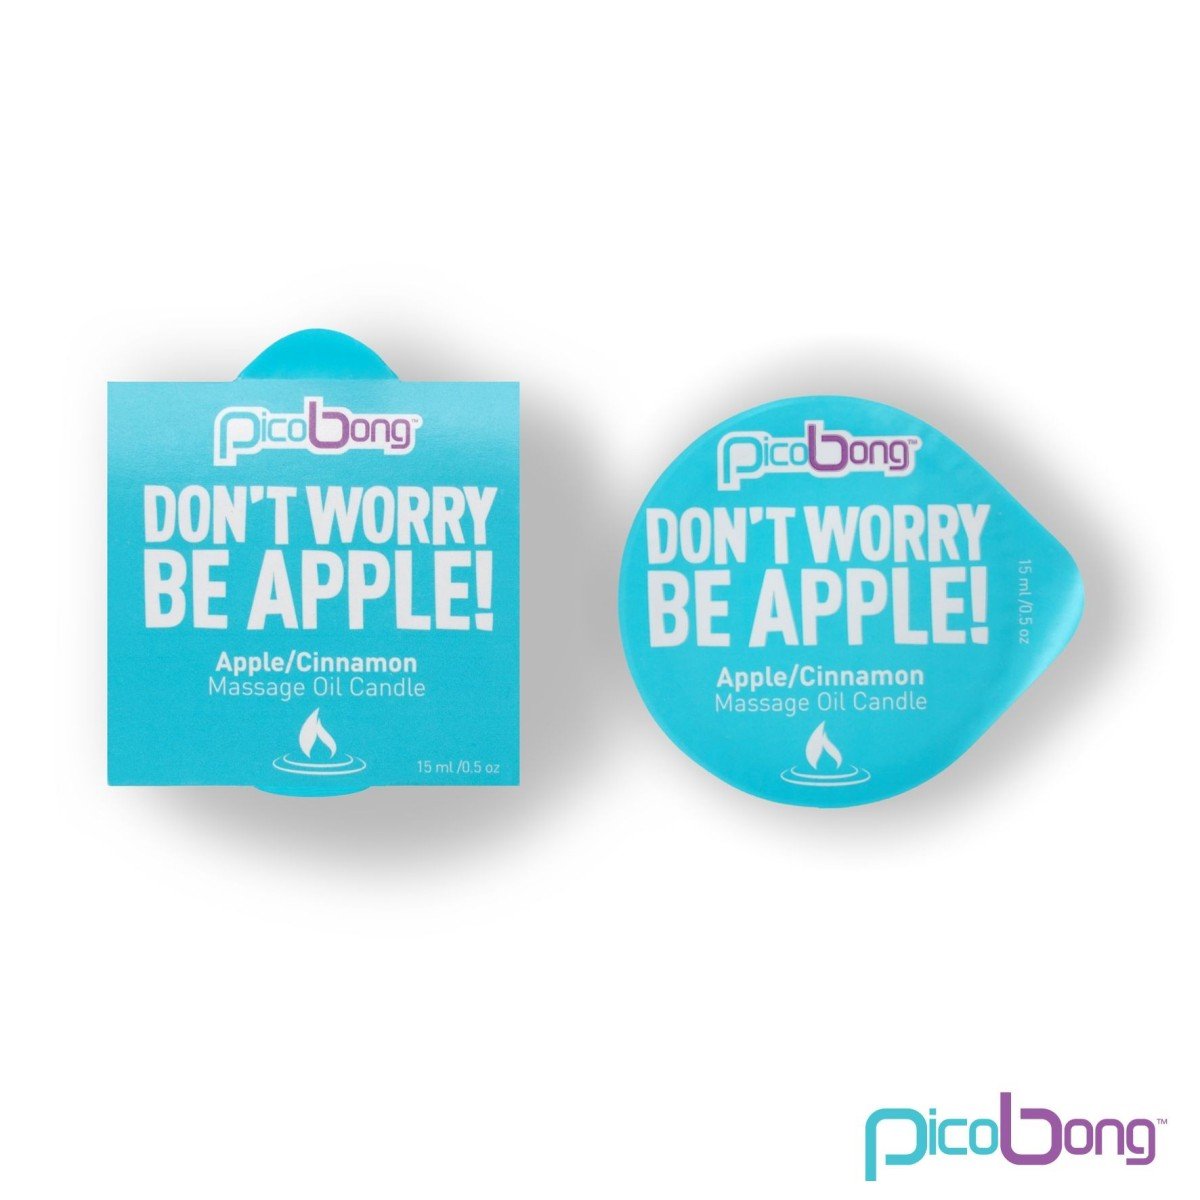 PicoBong Don’t Worry Be Apple! Massage Candle 15 ml